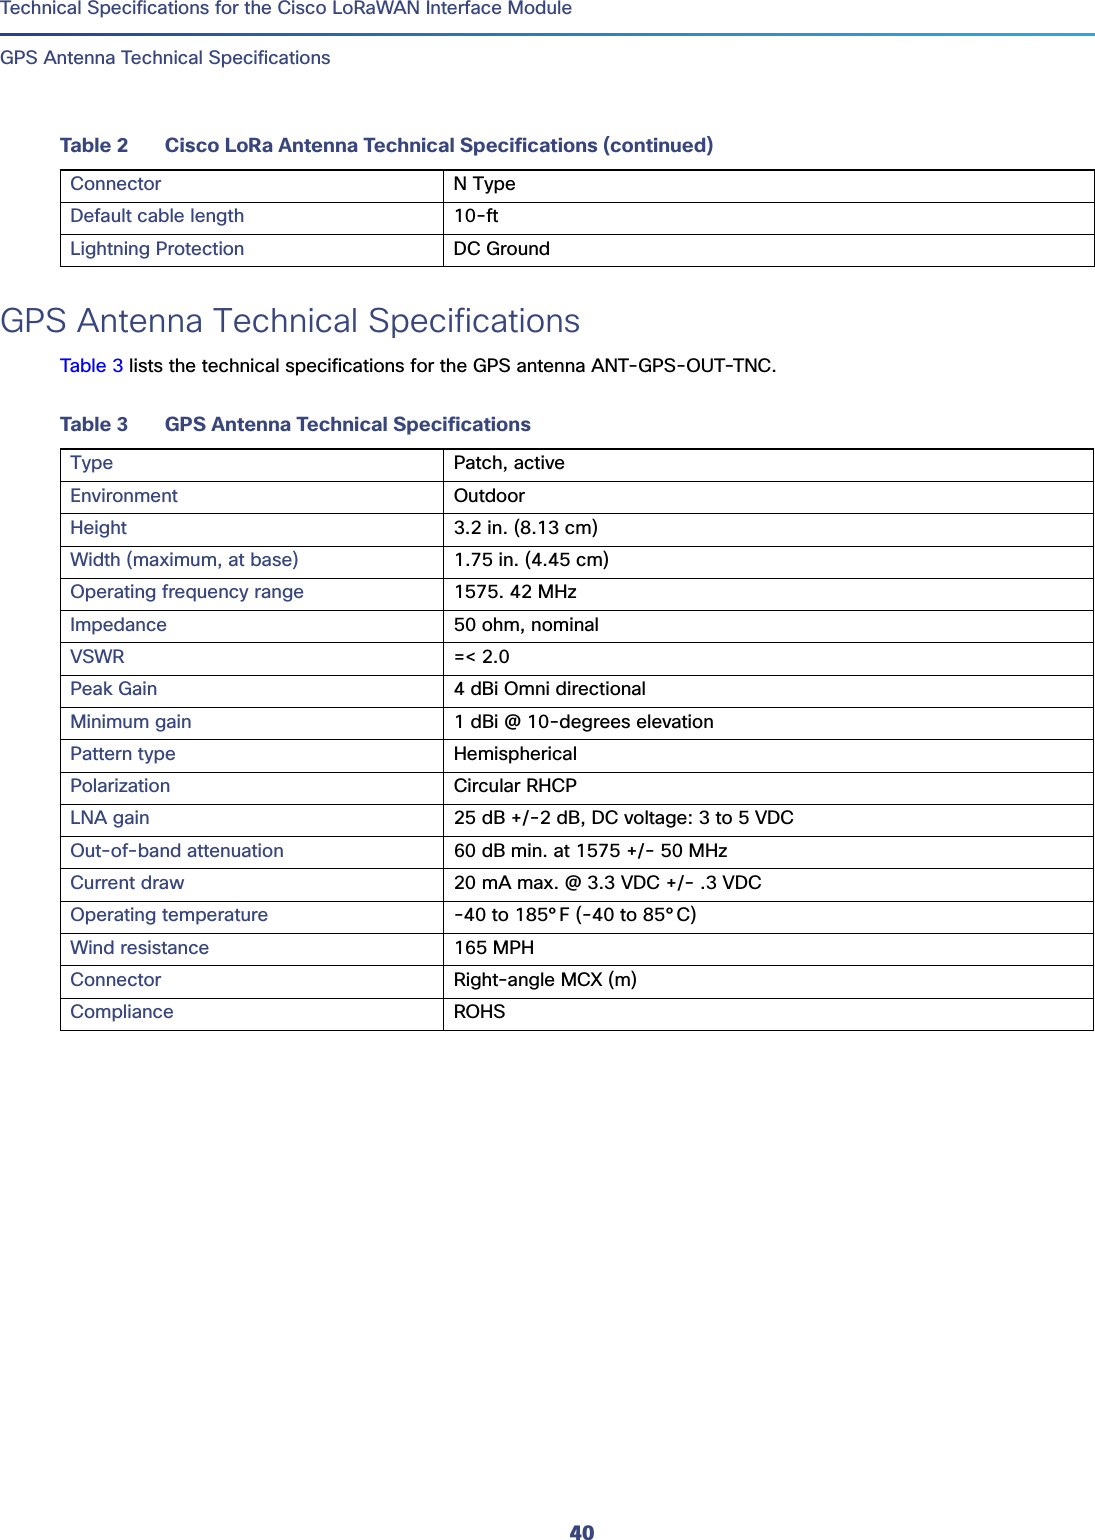 40Technical Specifications for the Cisco LoRaWAN Interface Module GPS Antenna Technical SpecificationsGPS Antenna Technical SpecificationsTable 3 lists the technical specifications for the GPS antenna ANT-GPS-OUT-TNC. Connector N TypeDefault cable length 10-ft Lightning Protection DC GroundTable 2 Cisco LoRa Antenna Technical Specifications (continued)Table 3 GPS Antenna Technical SpecificationsType Patch, active Environment OutdoorHeight 3.2 in. (8.13 cm)Width (maximum, at base) 1.75 in. (4.45 cm)Operating frequency range 1575. 42 MHzImpedance 50 ohm, nominalVSWR =&lt; 2.0Peak Gain 4 dBi Omni directionalMinimum gain 1 dBi @ 10-degrees elevationPattern type HemisphericalPolarization  Circular RHCPLNA gain 25 dB +/-2 dB, DC voltage: 3 to 5 VDCOut-of-band attenuation 60 dB min. at 1575 +/- 50 MHzCurrent draw 20 mA max. @ 3.3 VDC +/- .3 VDCOperating temperature -40 to 185°F (-40 to 85°C)Wind resistance 165 MPHConnector Right-angle MCX (m)Compliance ROHS